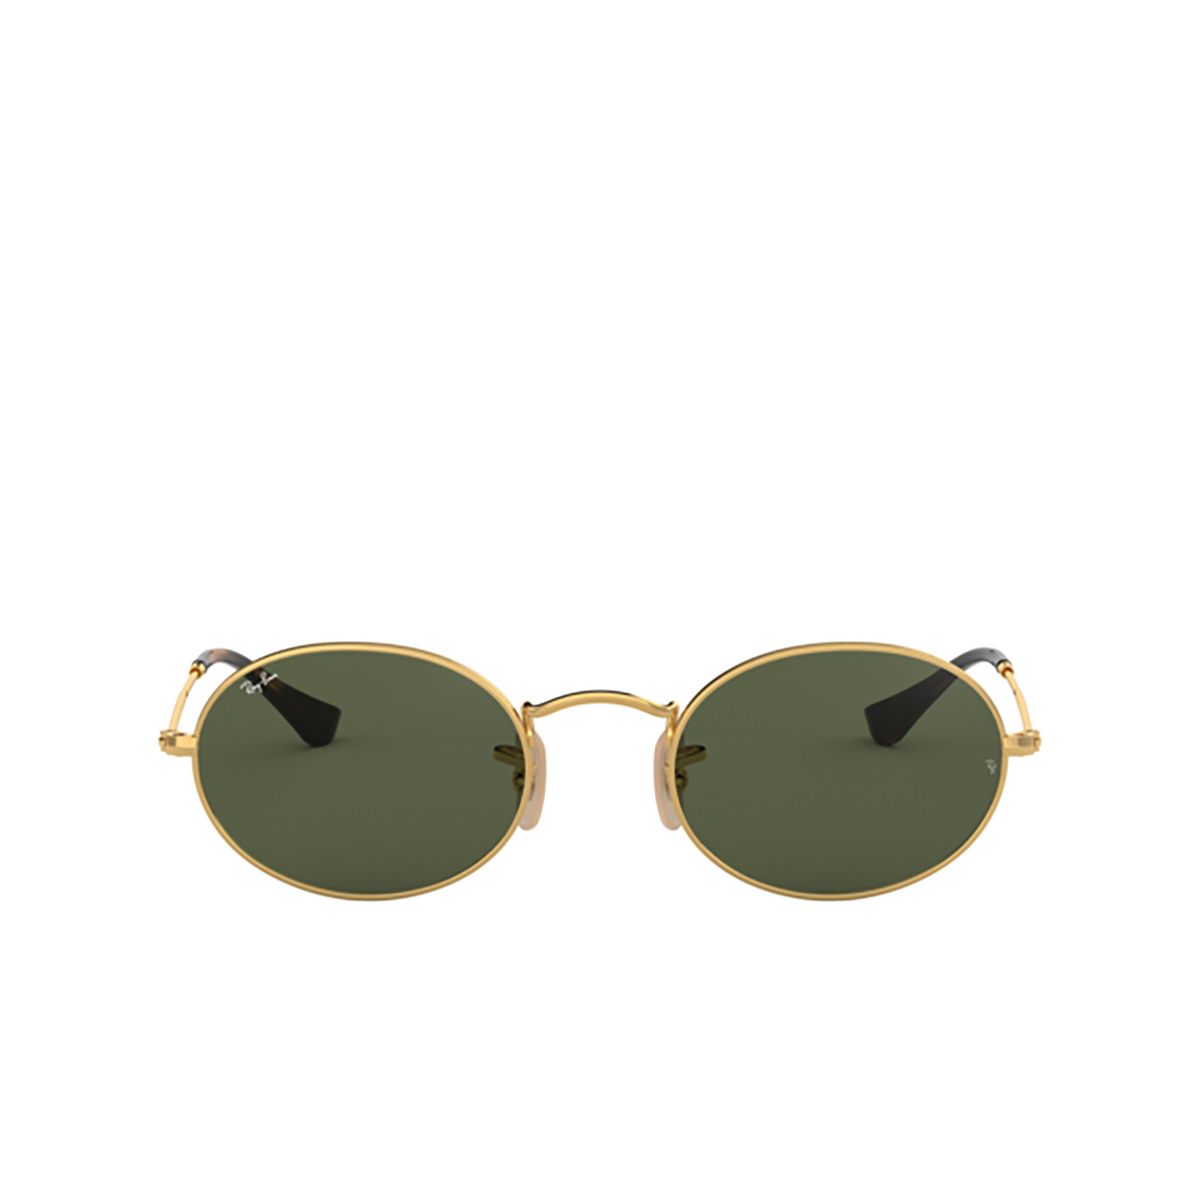 Ray-Ban OVAL Sunglasses 001 Arista - front view